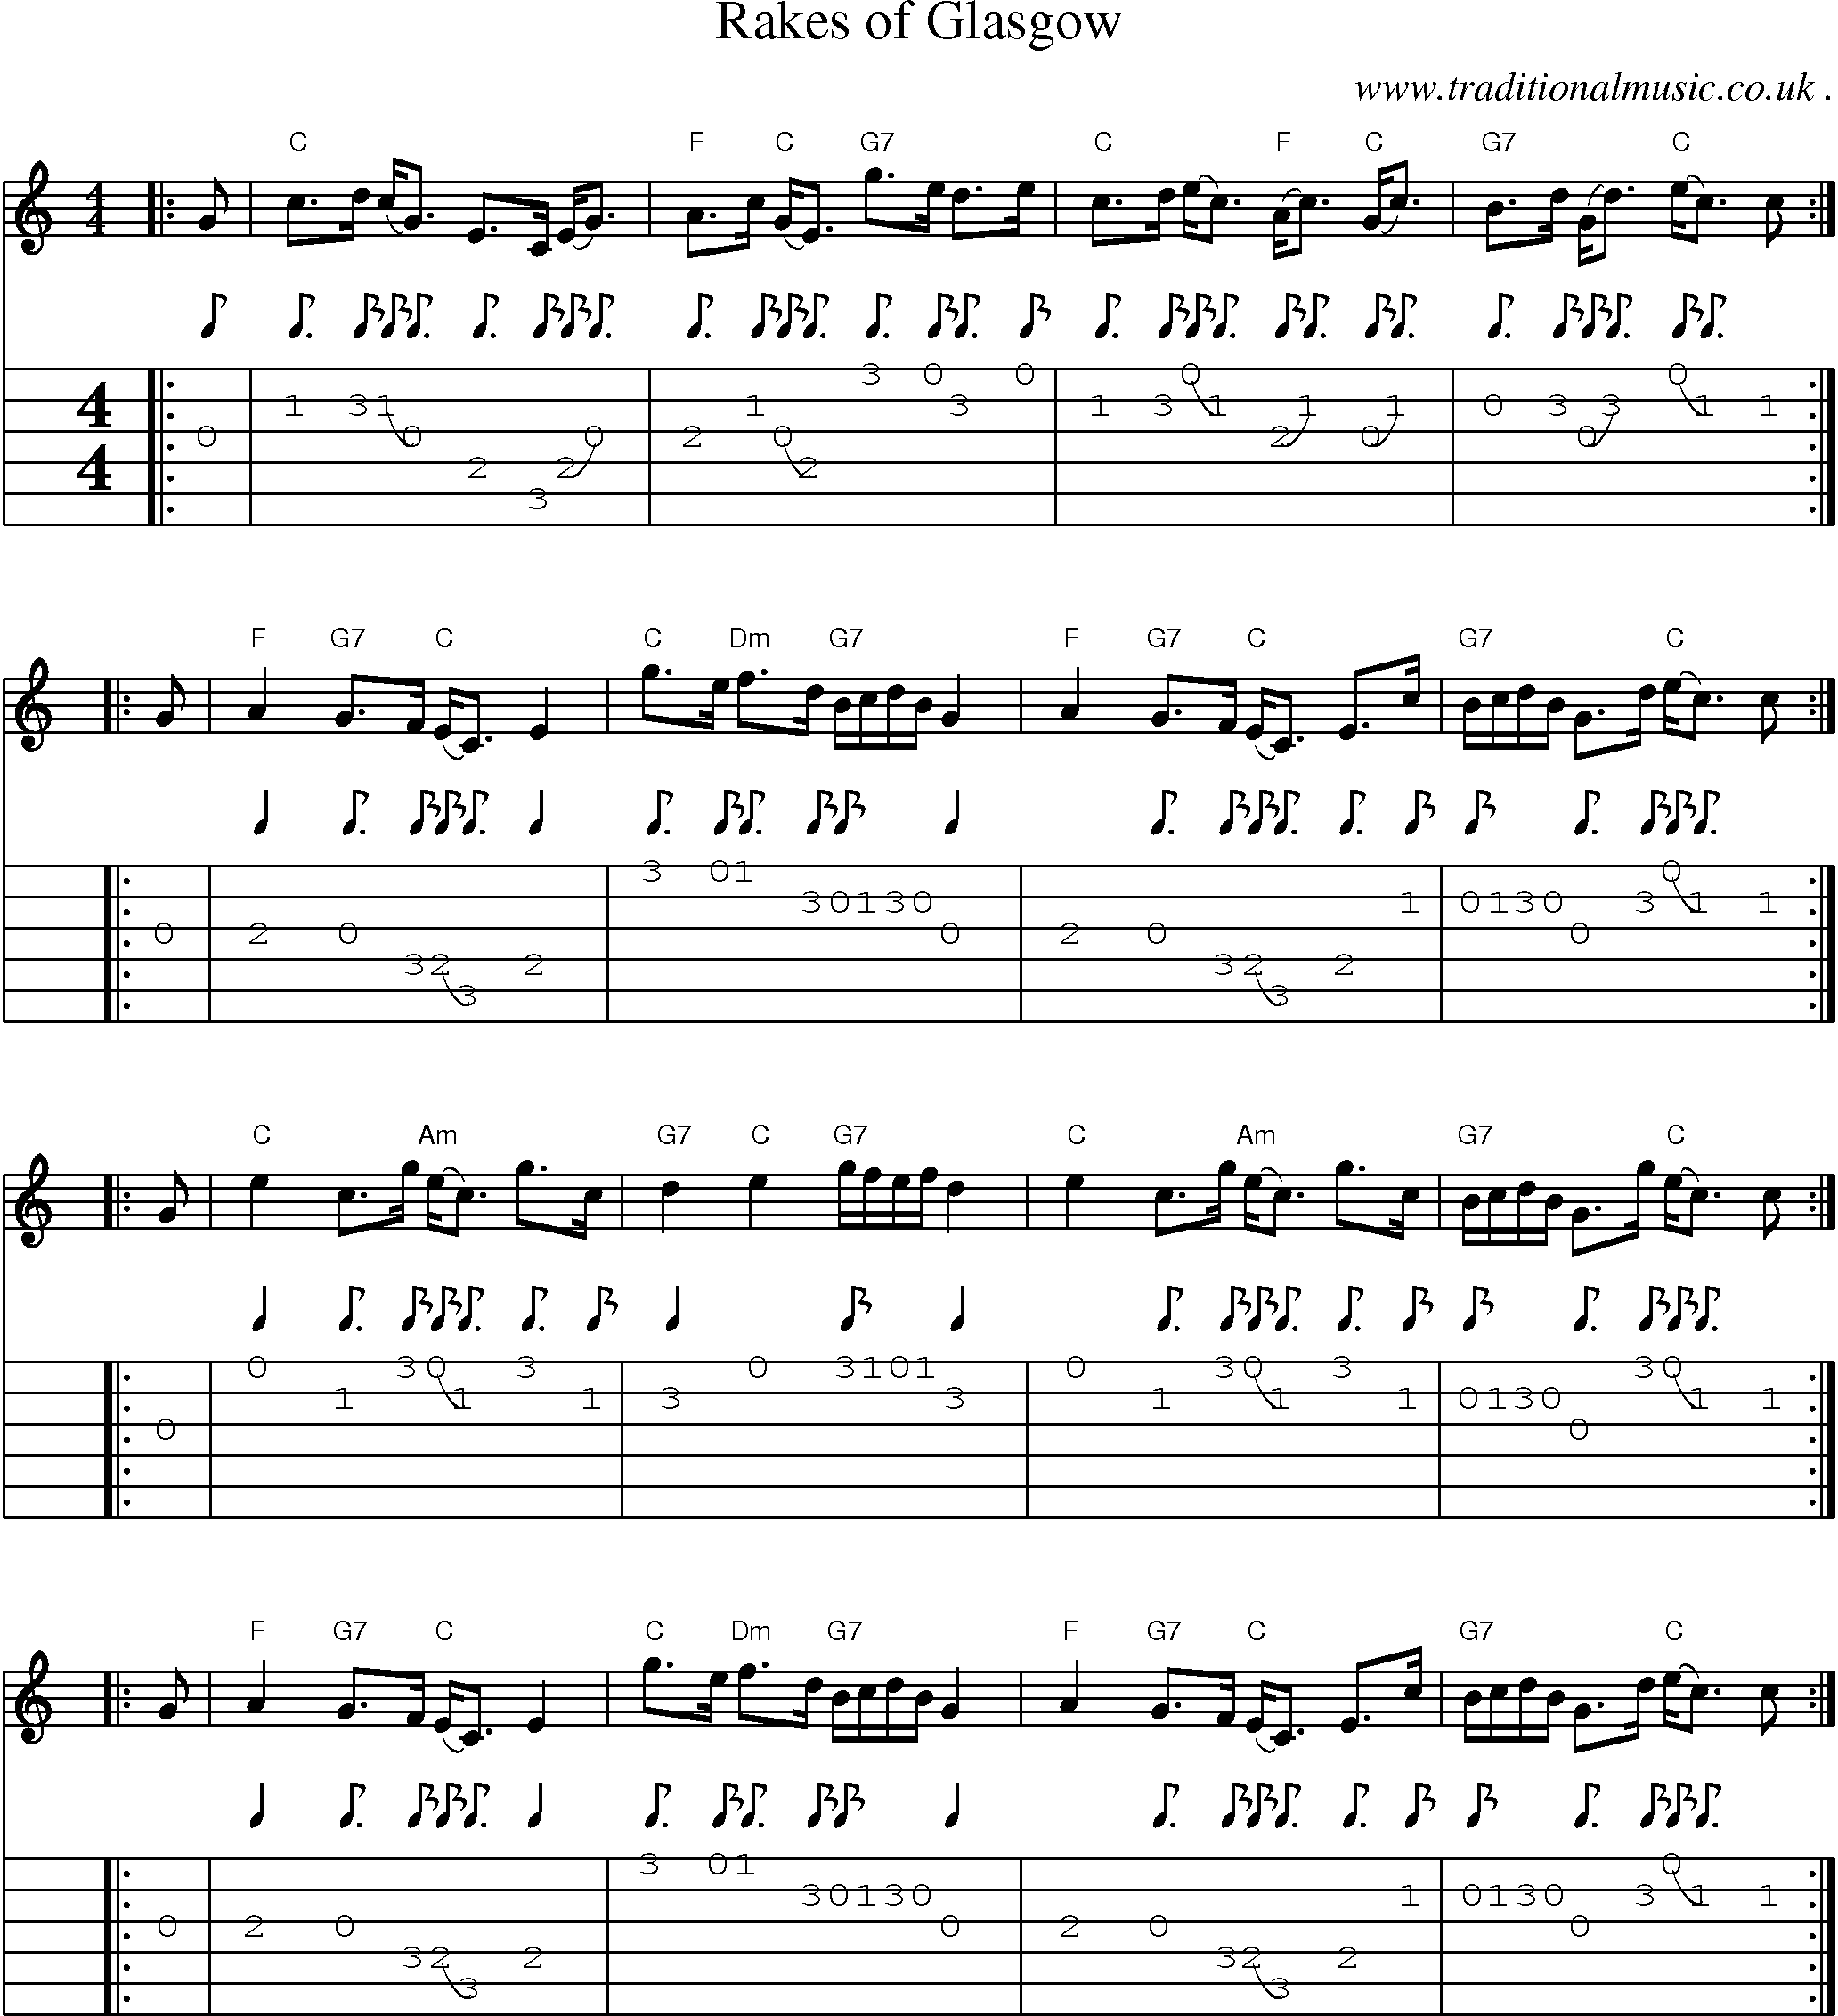 Sheet-music  score, Chords and Guitar Tabs for Rakes Of Glasgow